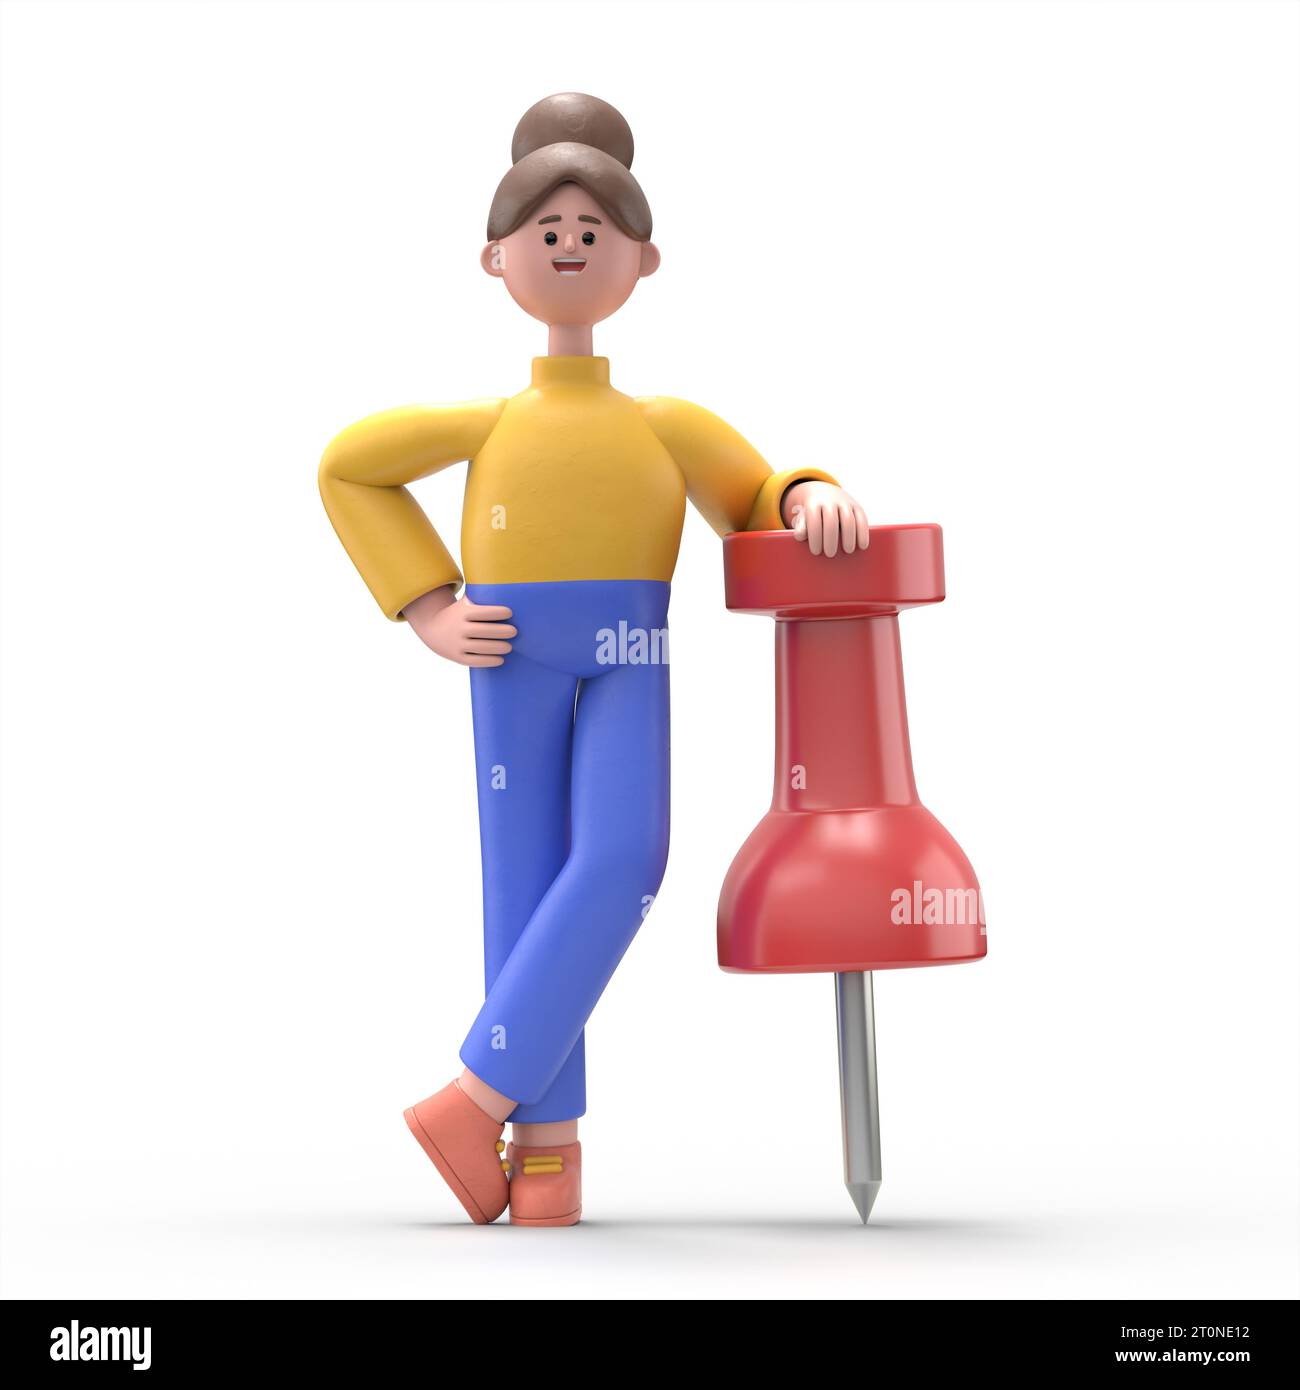 3D illustration of Asian woman Angela figure with pin needle.3D rendering on white background. Stock Photo